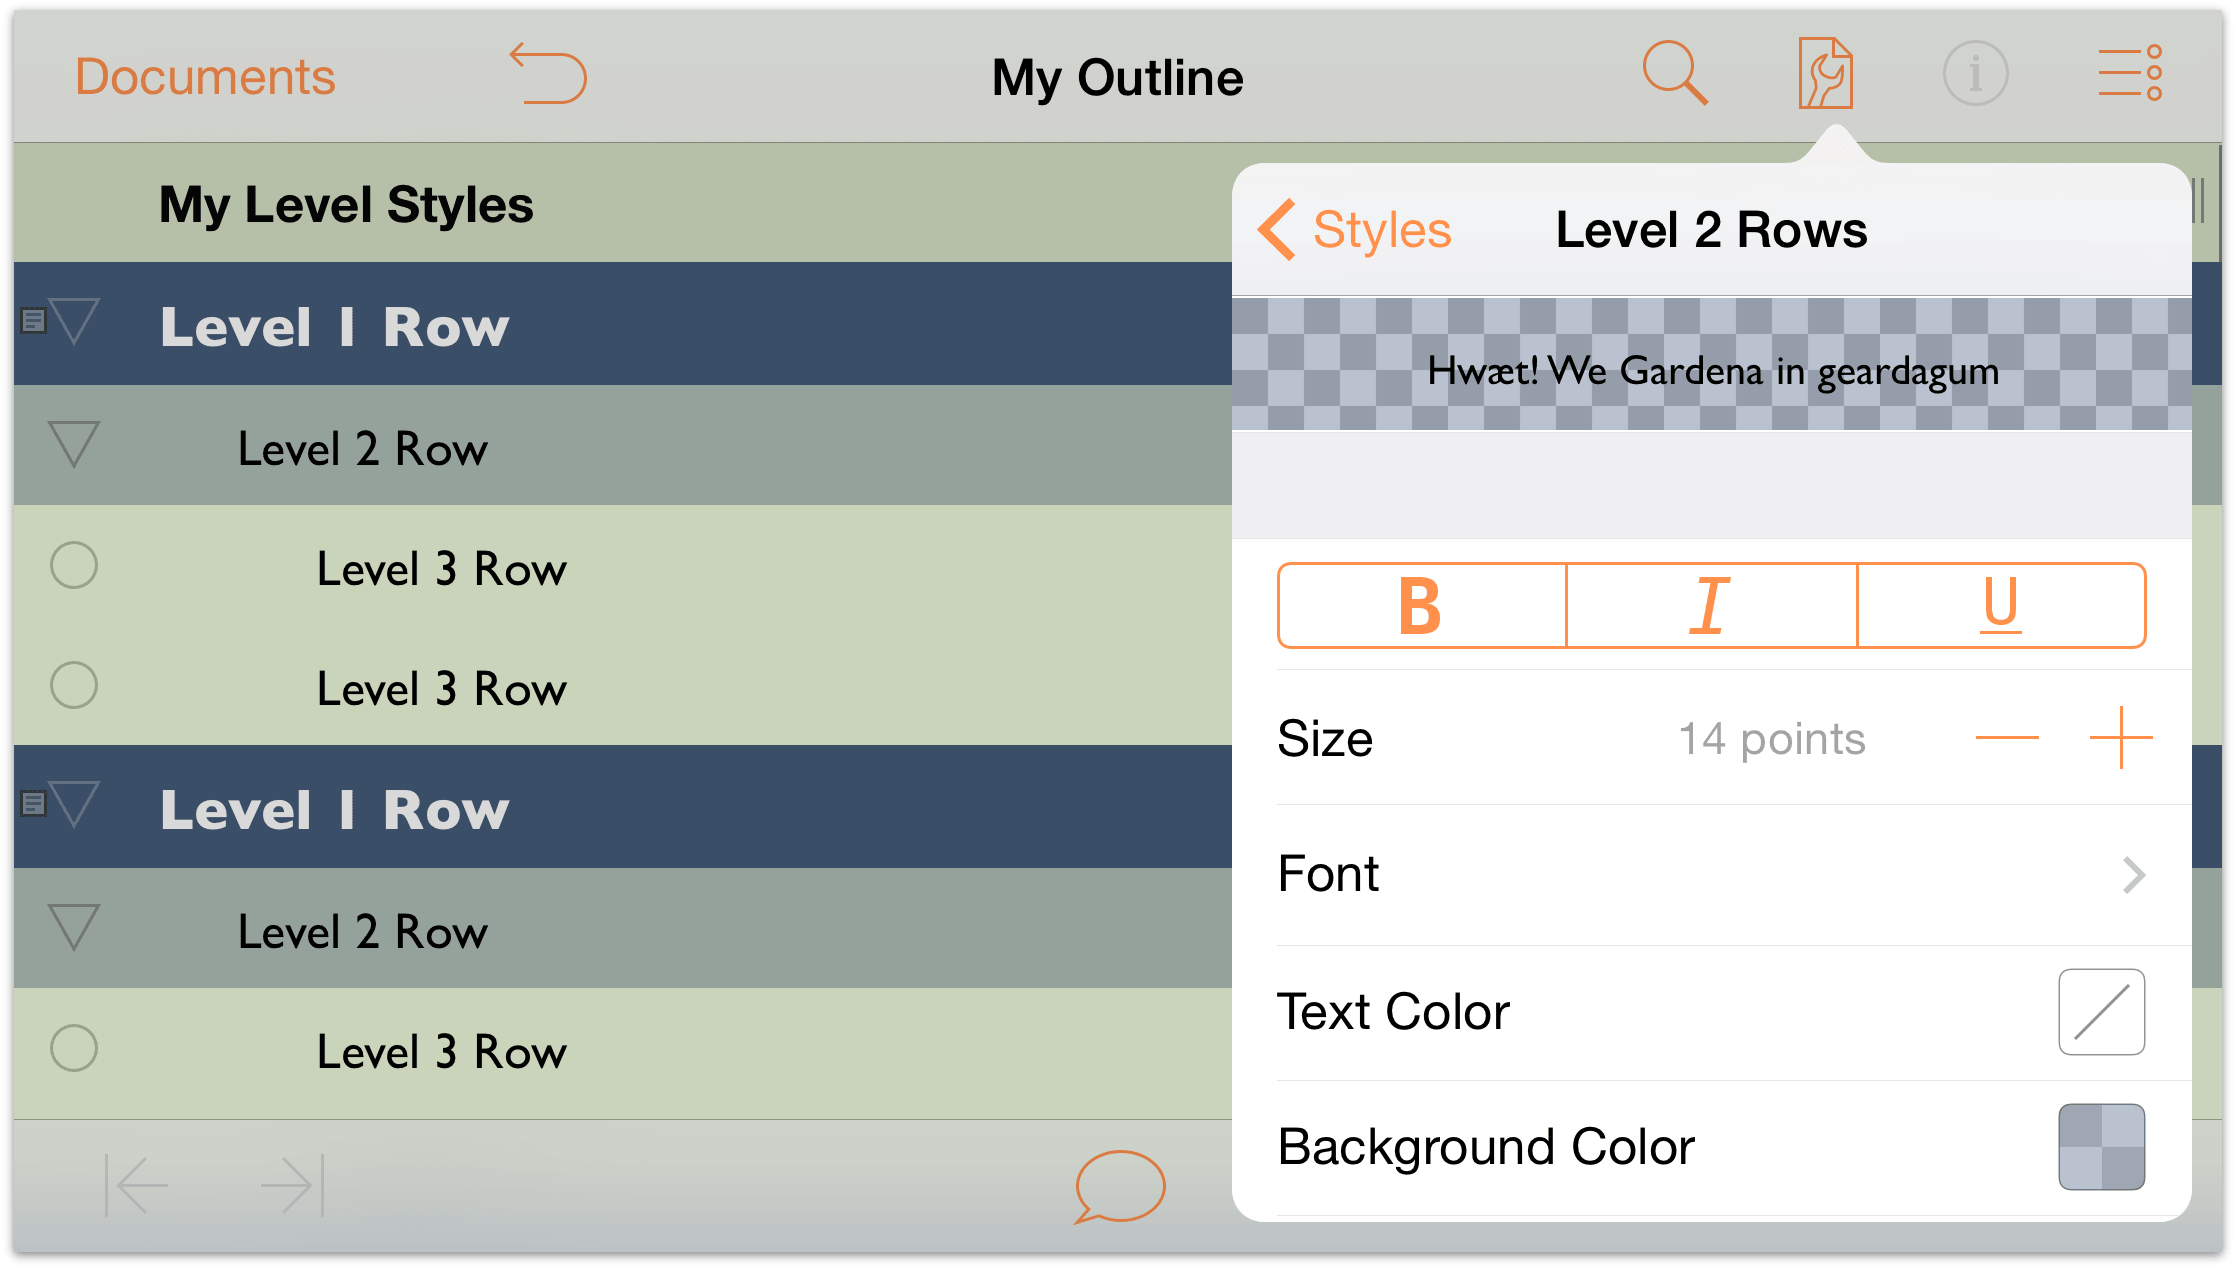 The Level 2 Rows style pane